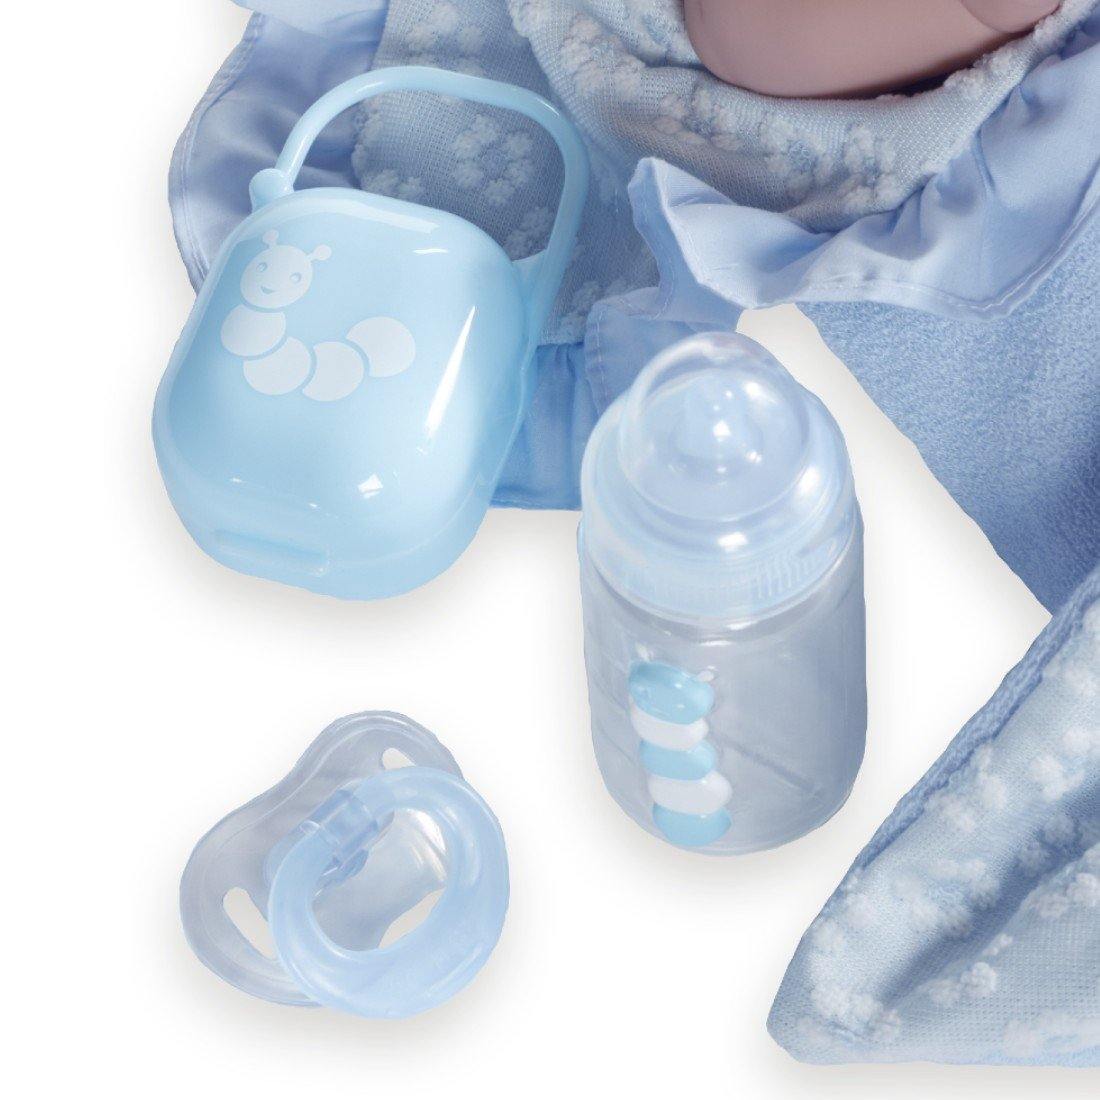 JC Toys, La Newborn Realistic Soft Body Baby Doll 15.5in - Blue outfit 7pcs Set - JC Toys Group Inc.